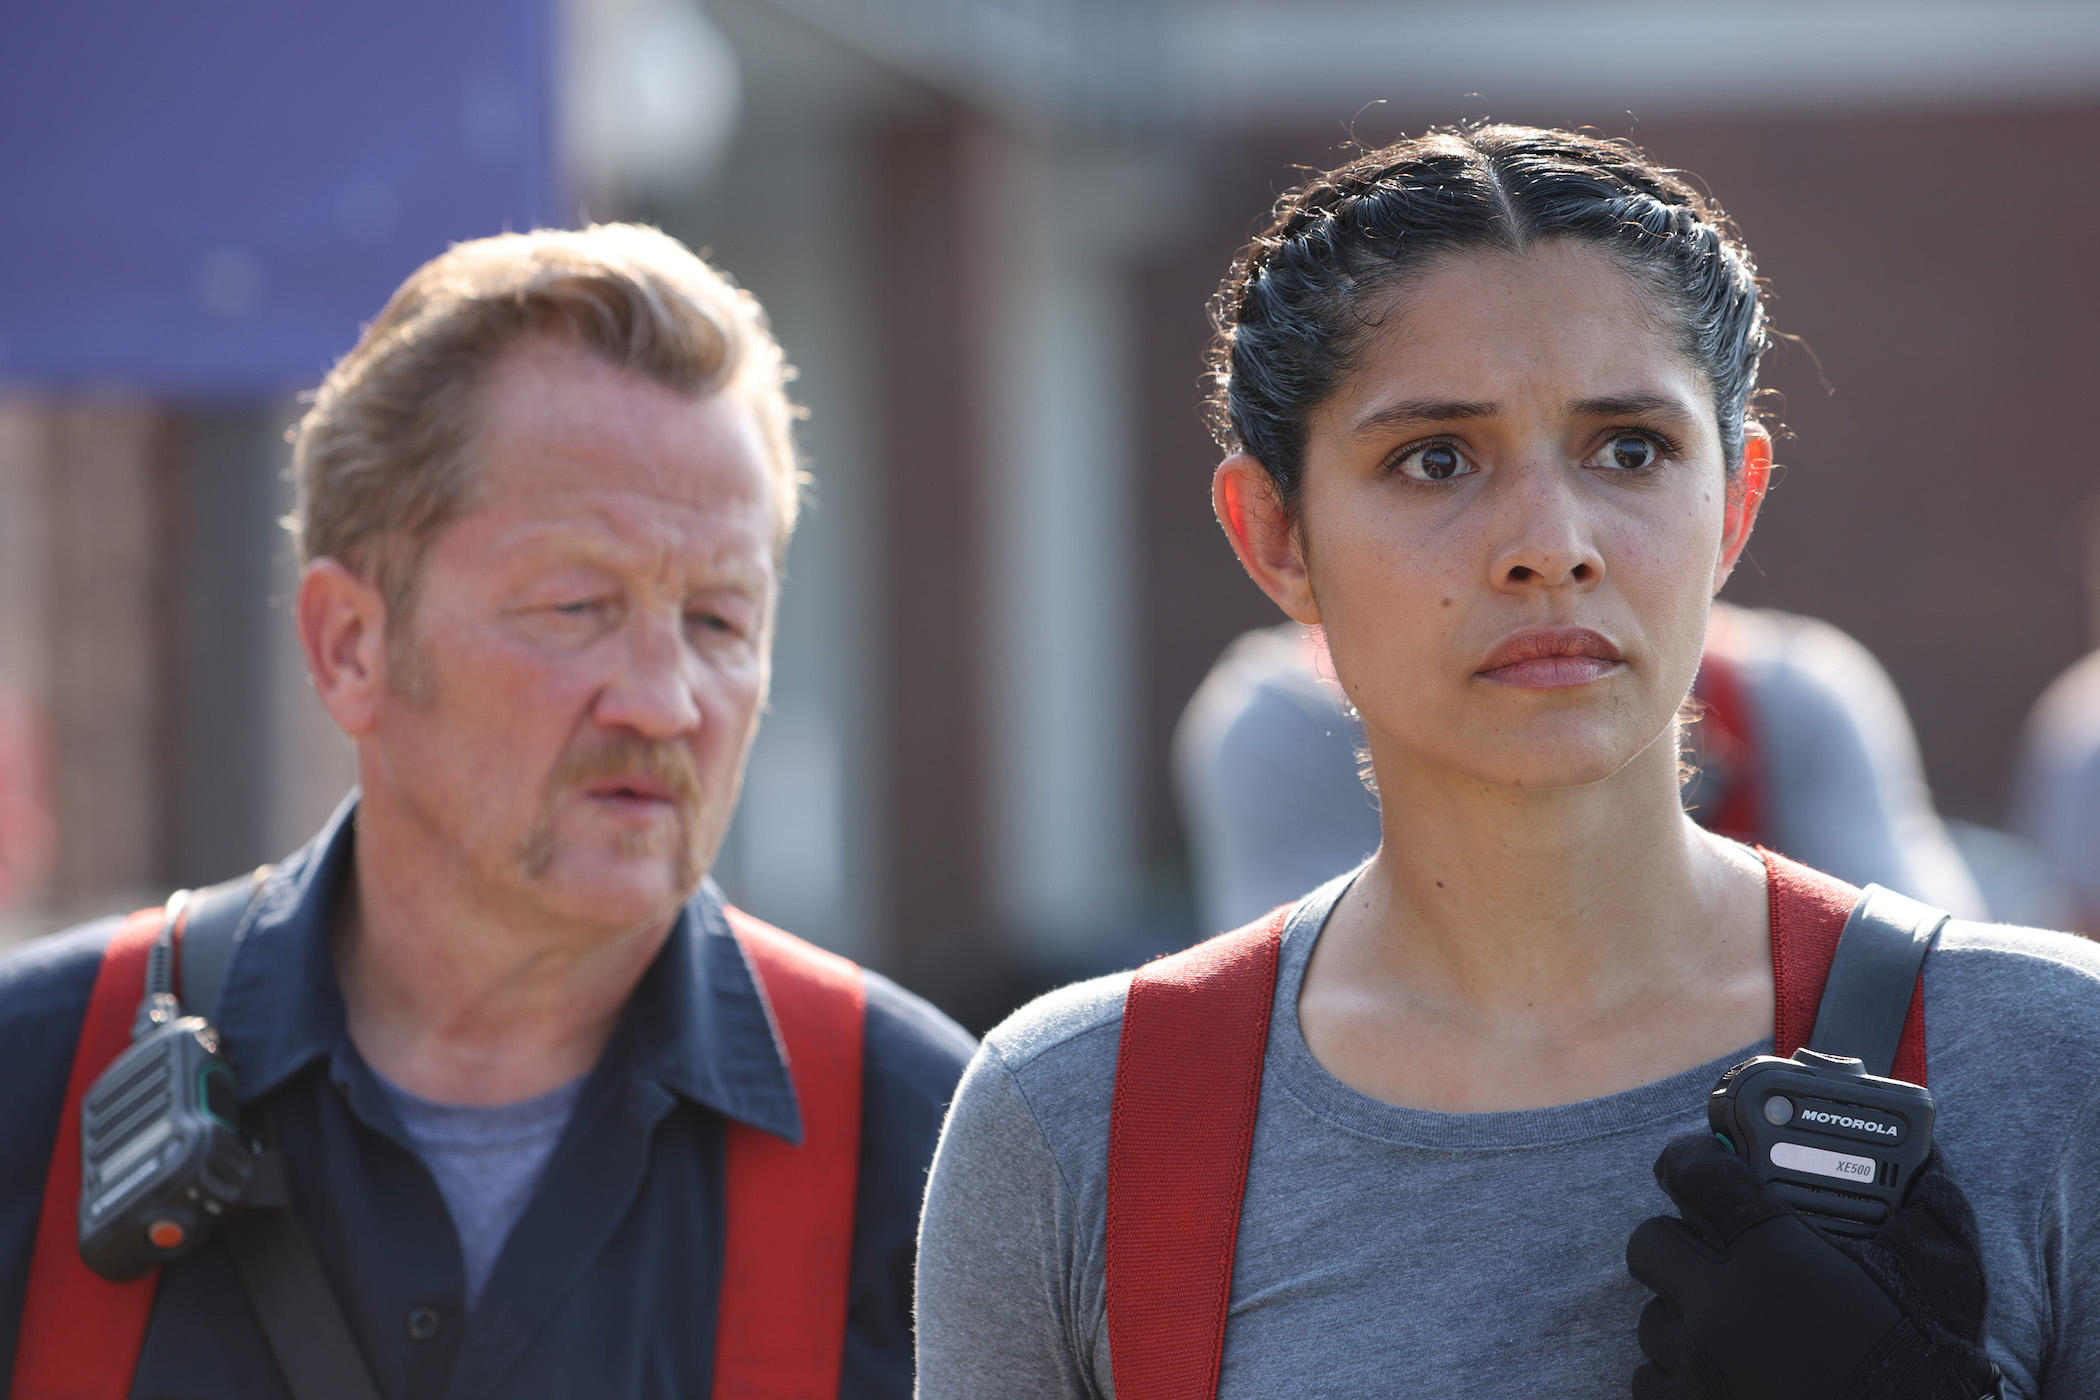 Christian Stolte as Randall Mouch McHolland and Miranda Rae Mayo as Stella Kidd in 'Chicago Fire' Season 10